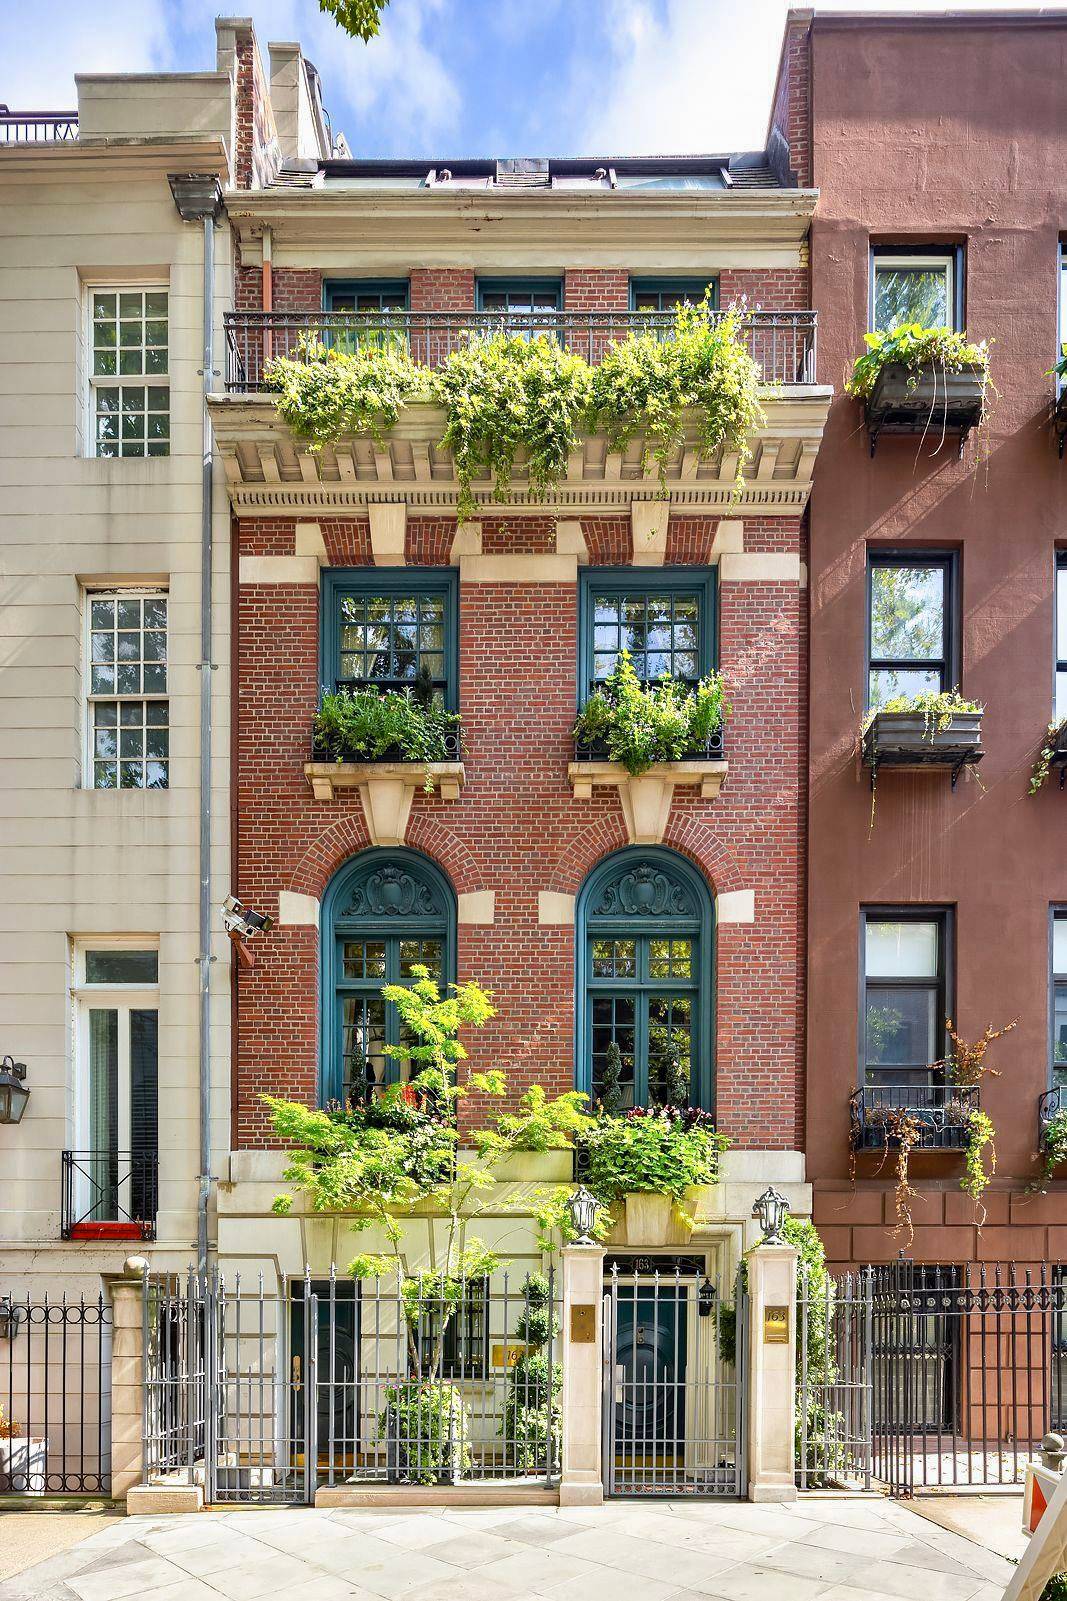 163 EAST 64TH STREET | THE TOWNHOUSE | 8000SF SUBLIME PERFECTION